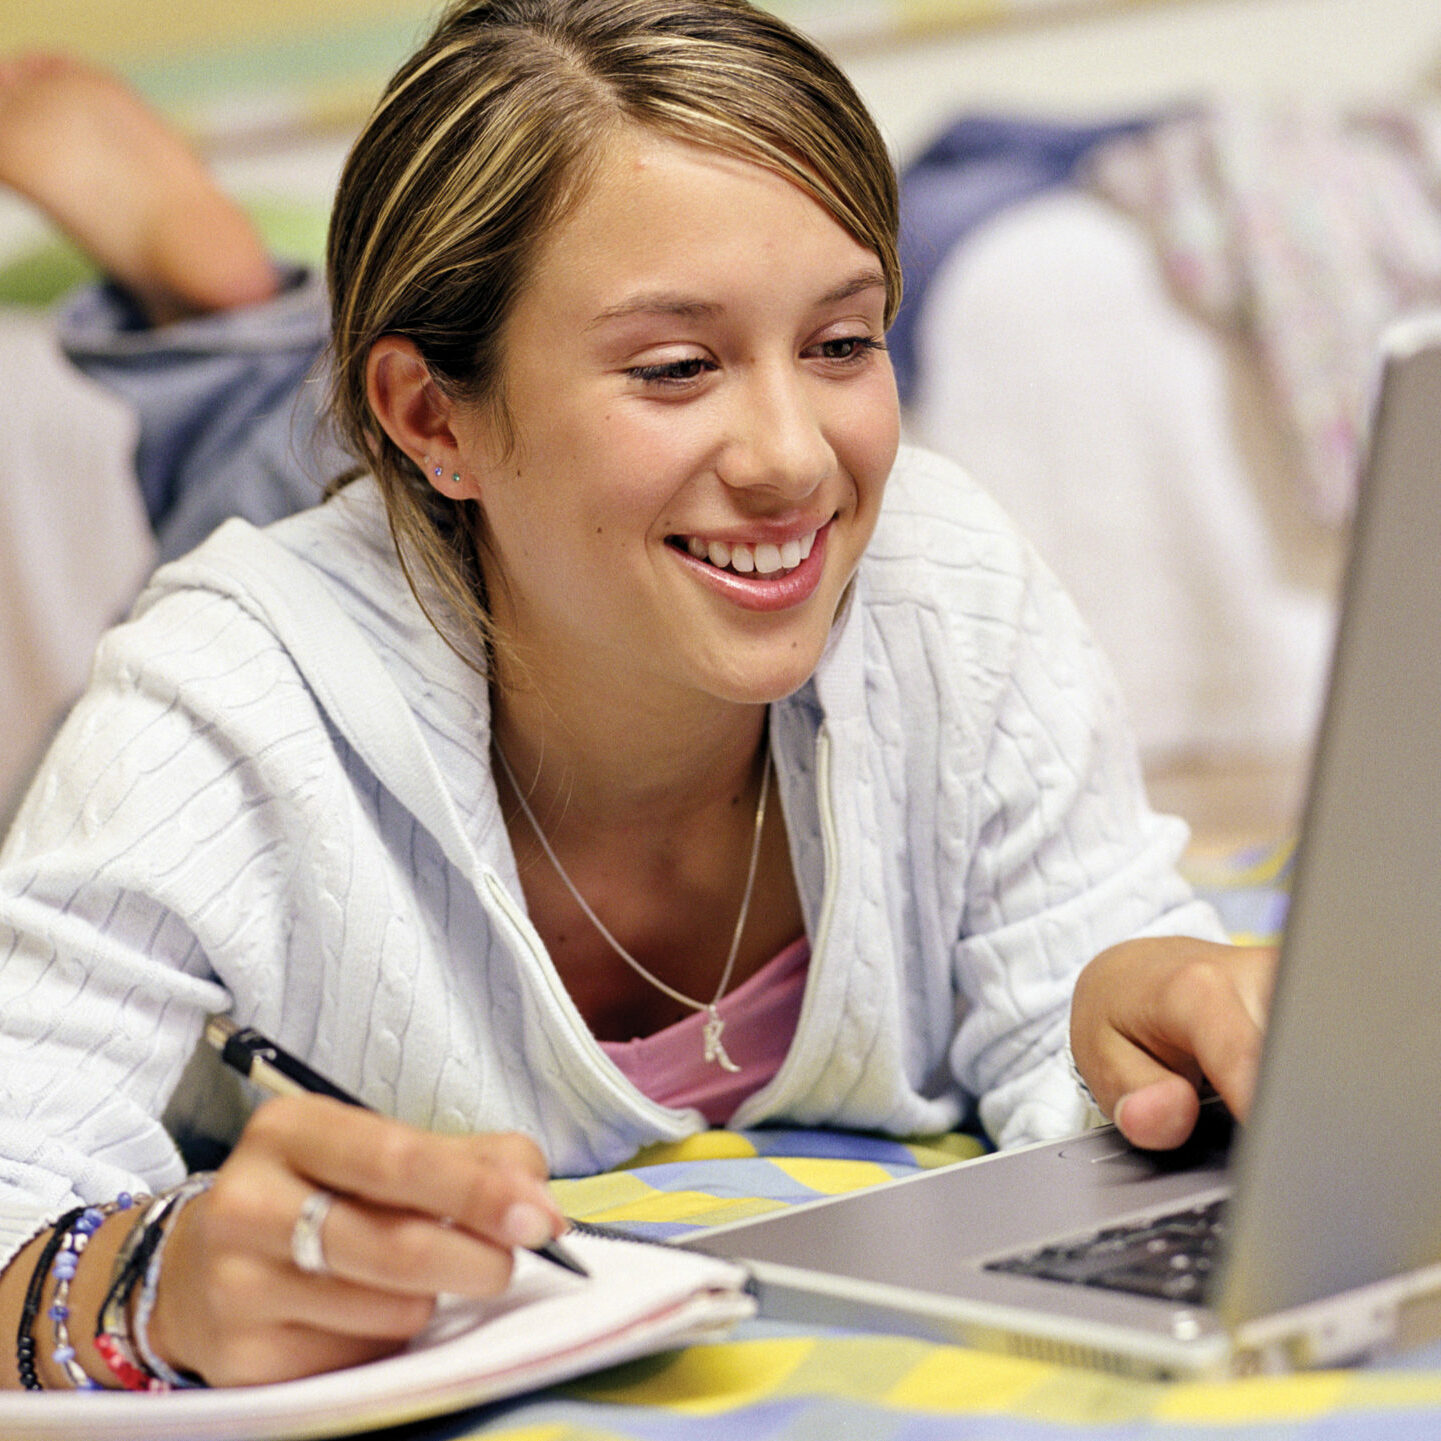 A teenage girl reclines on her bed while looking at a laptop and holding a pen in her right hand about to write in a notebook